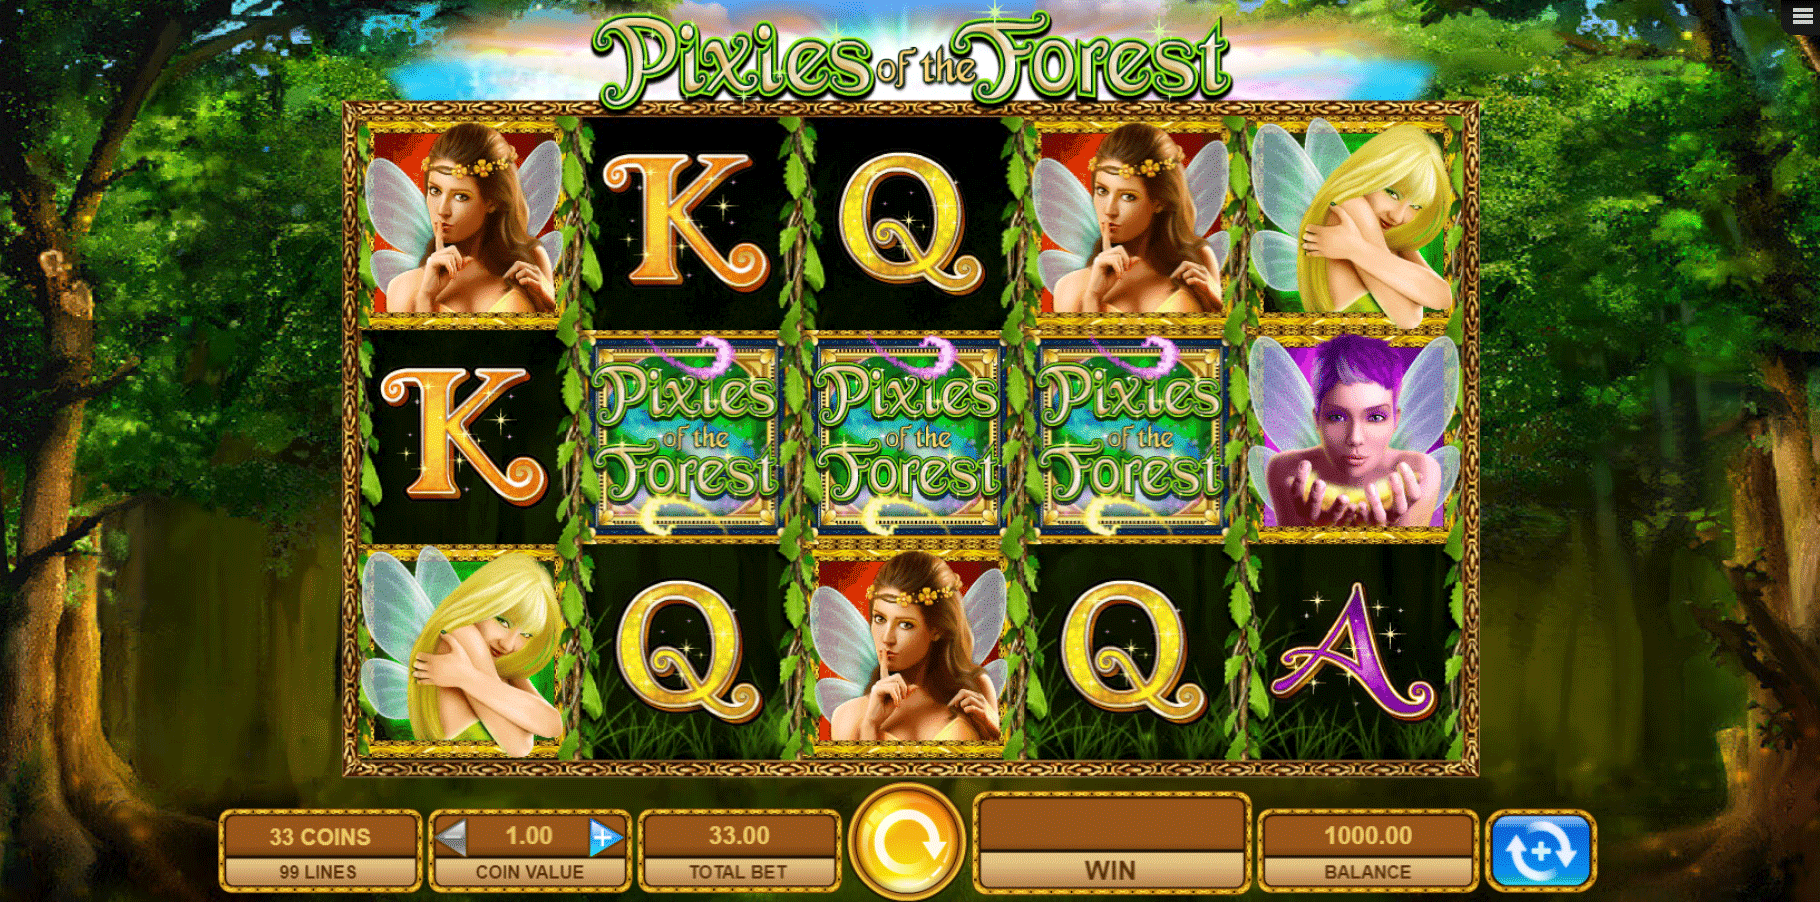 griglia della slot online Pixies of the Forest